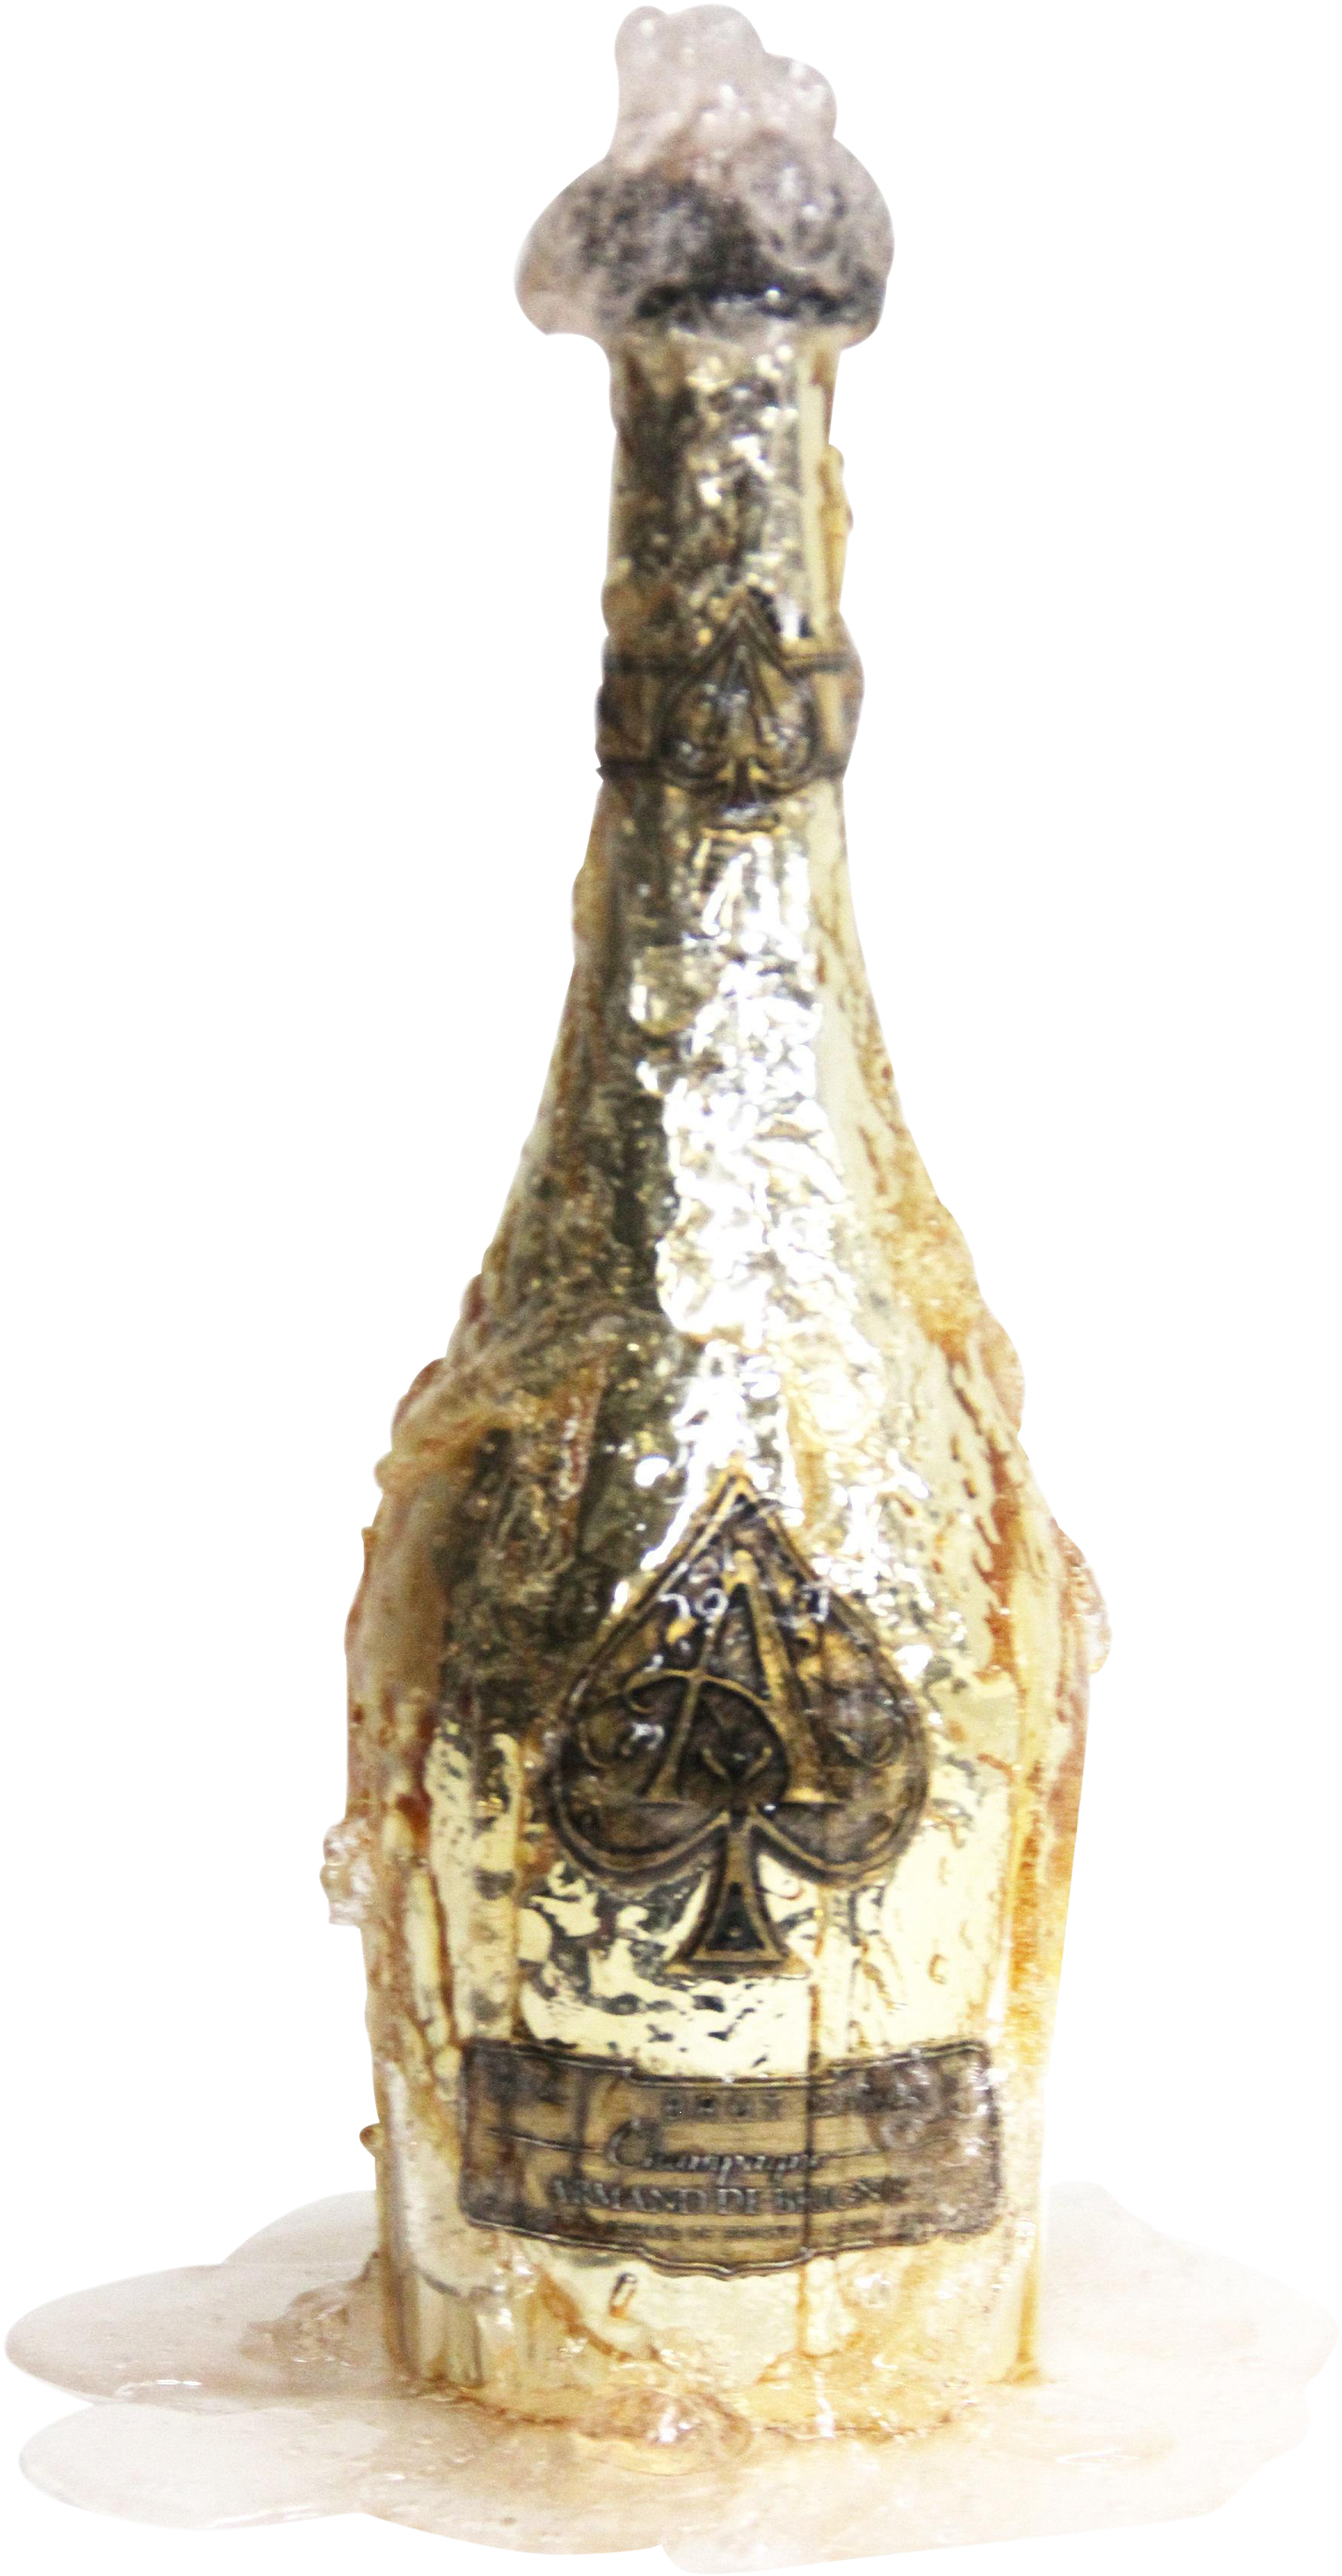 A Gold Bottle With A Black And Silver Design